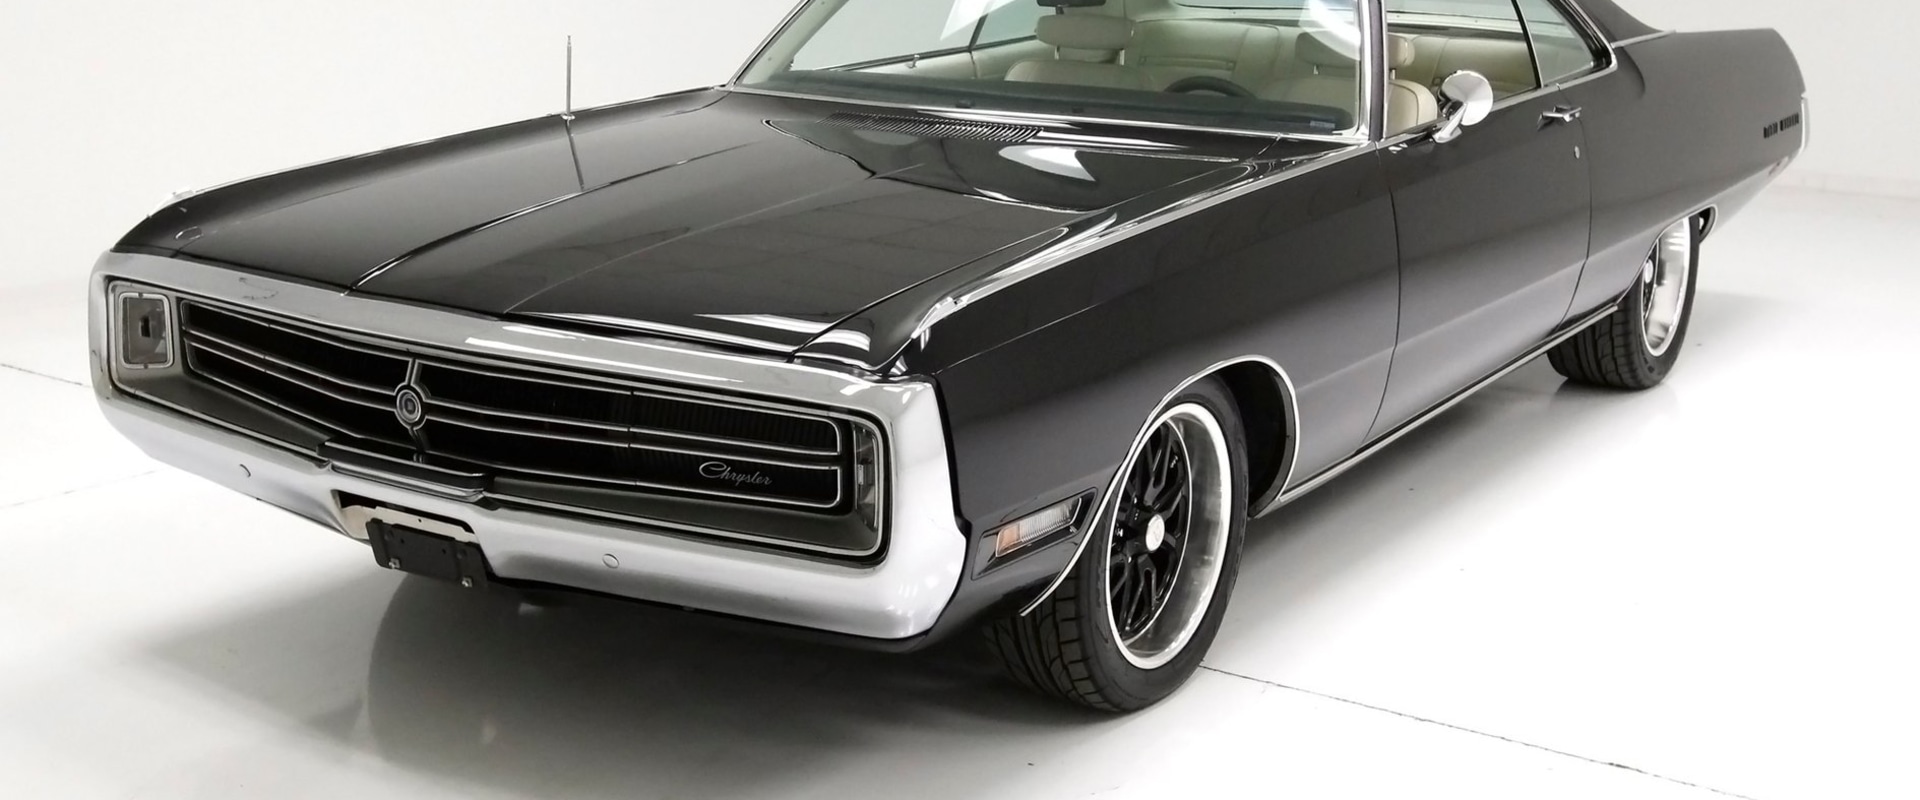 What parts are available for mopar classic cars?